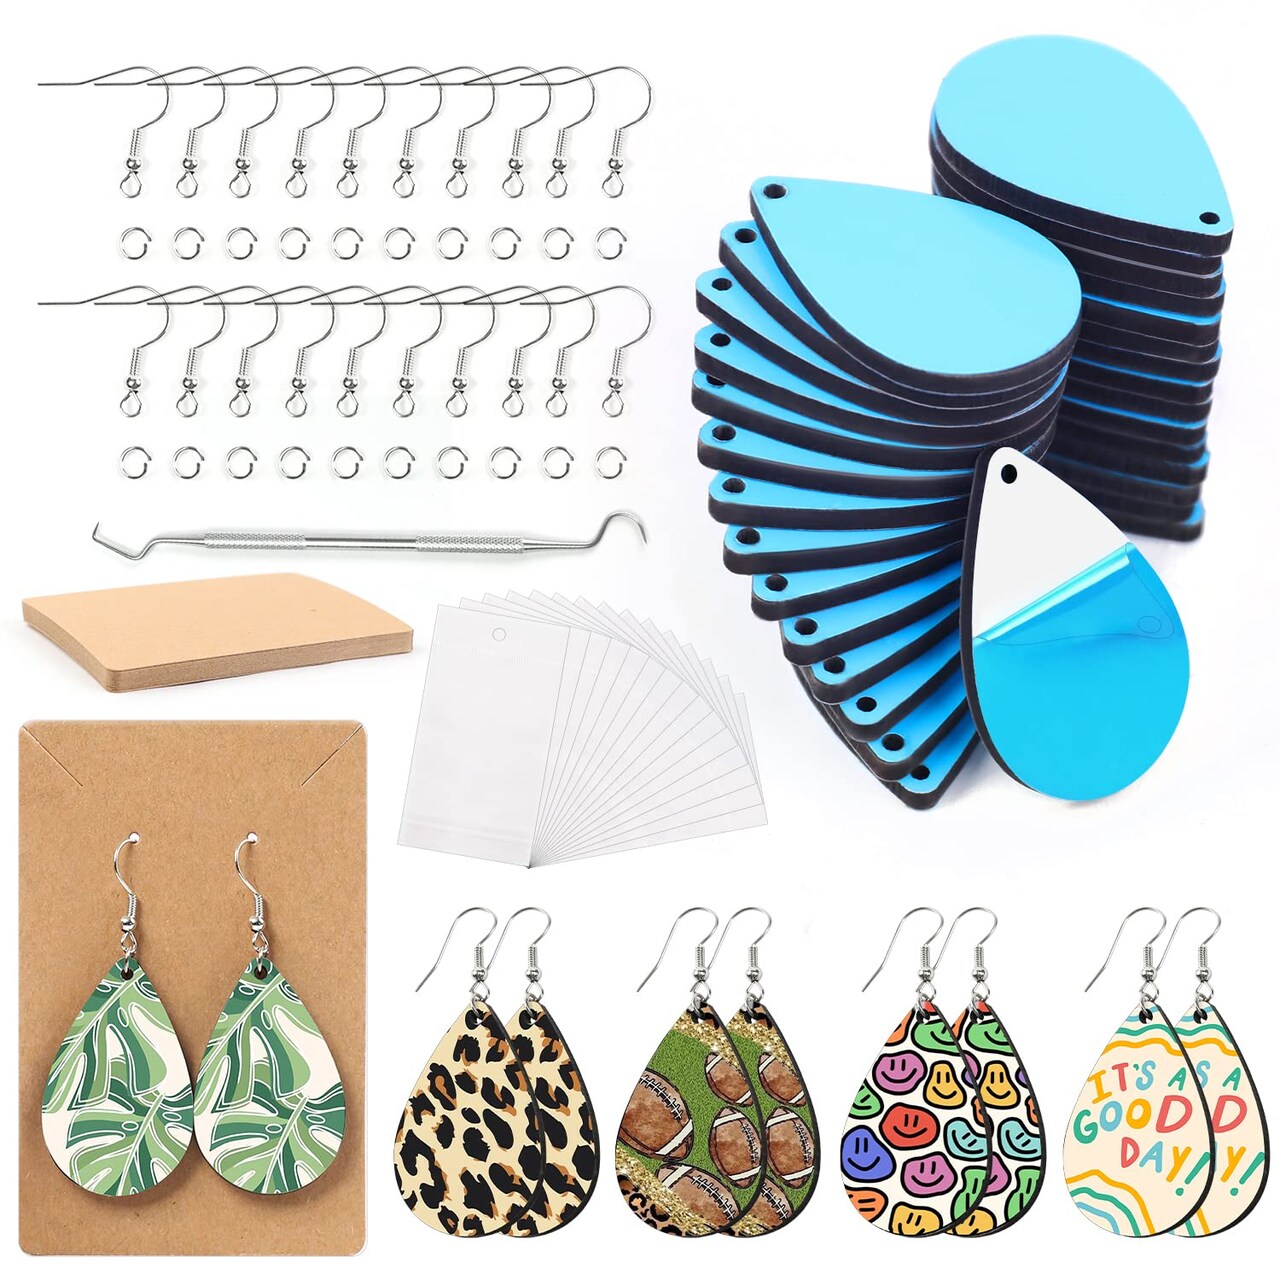 HTVRONT Sublimation Earring Blanks Bulk - 30 Pcs Wood Earrings Blanks with  Blue Protective Film - Unfinished MDF Teardrop Earrings for Sublimation  Printing with Template, Weeder, Hooks, Jump Rings